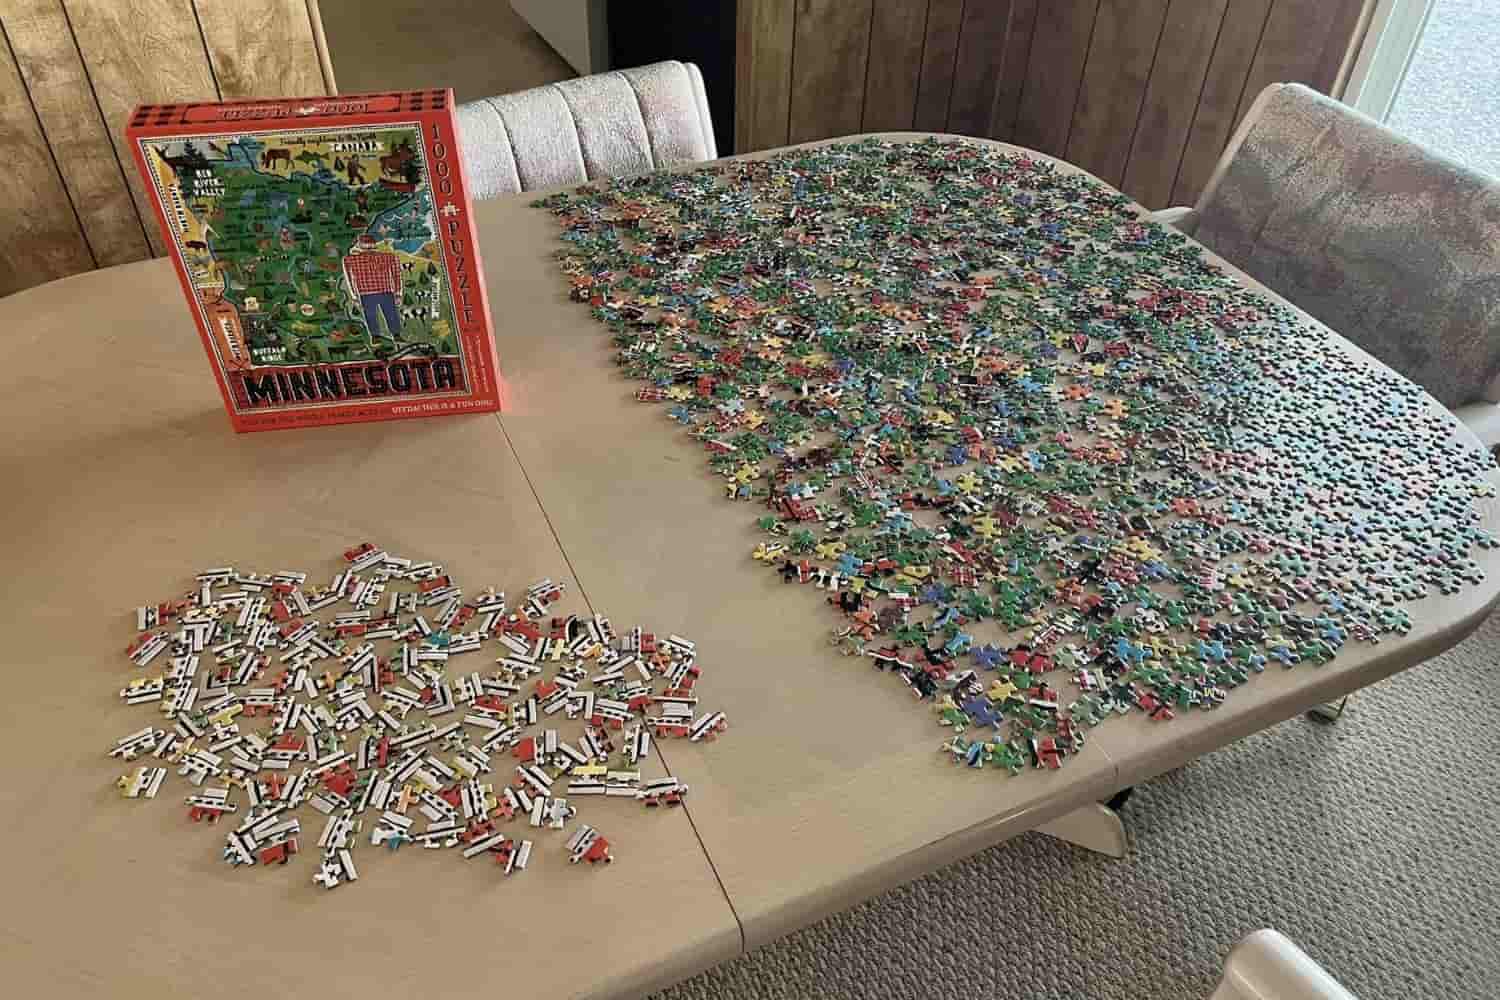 The Materials Used for Puzzle-Making